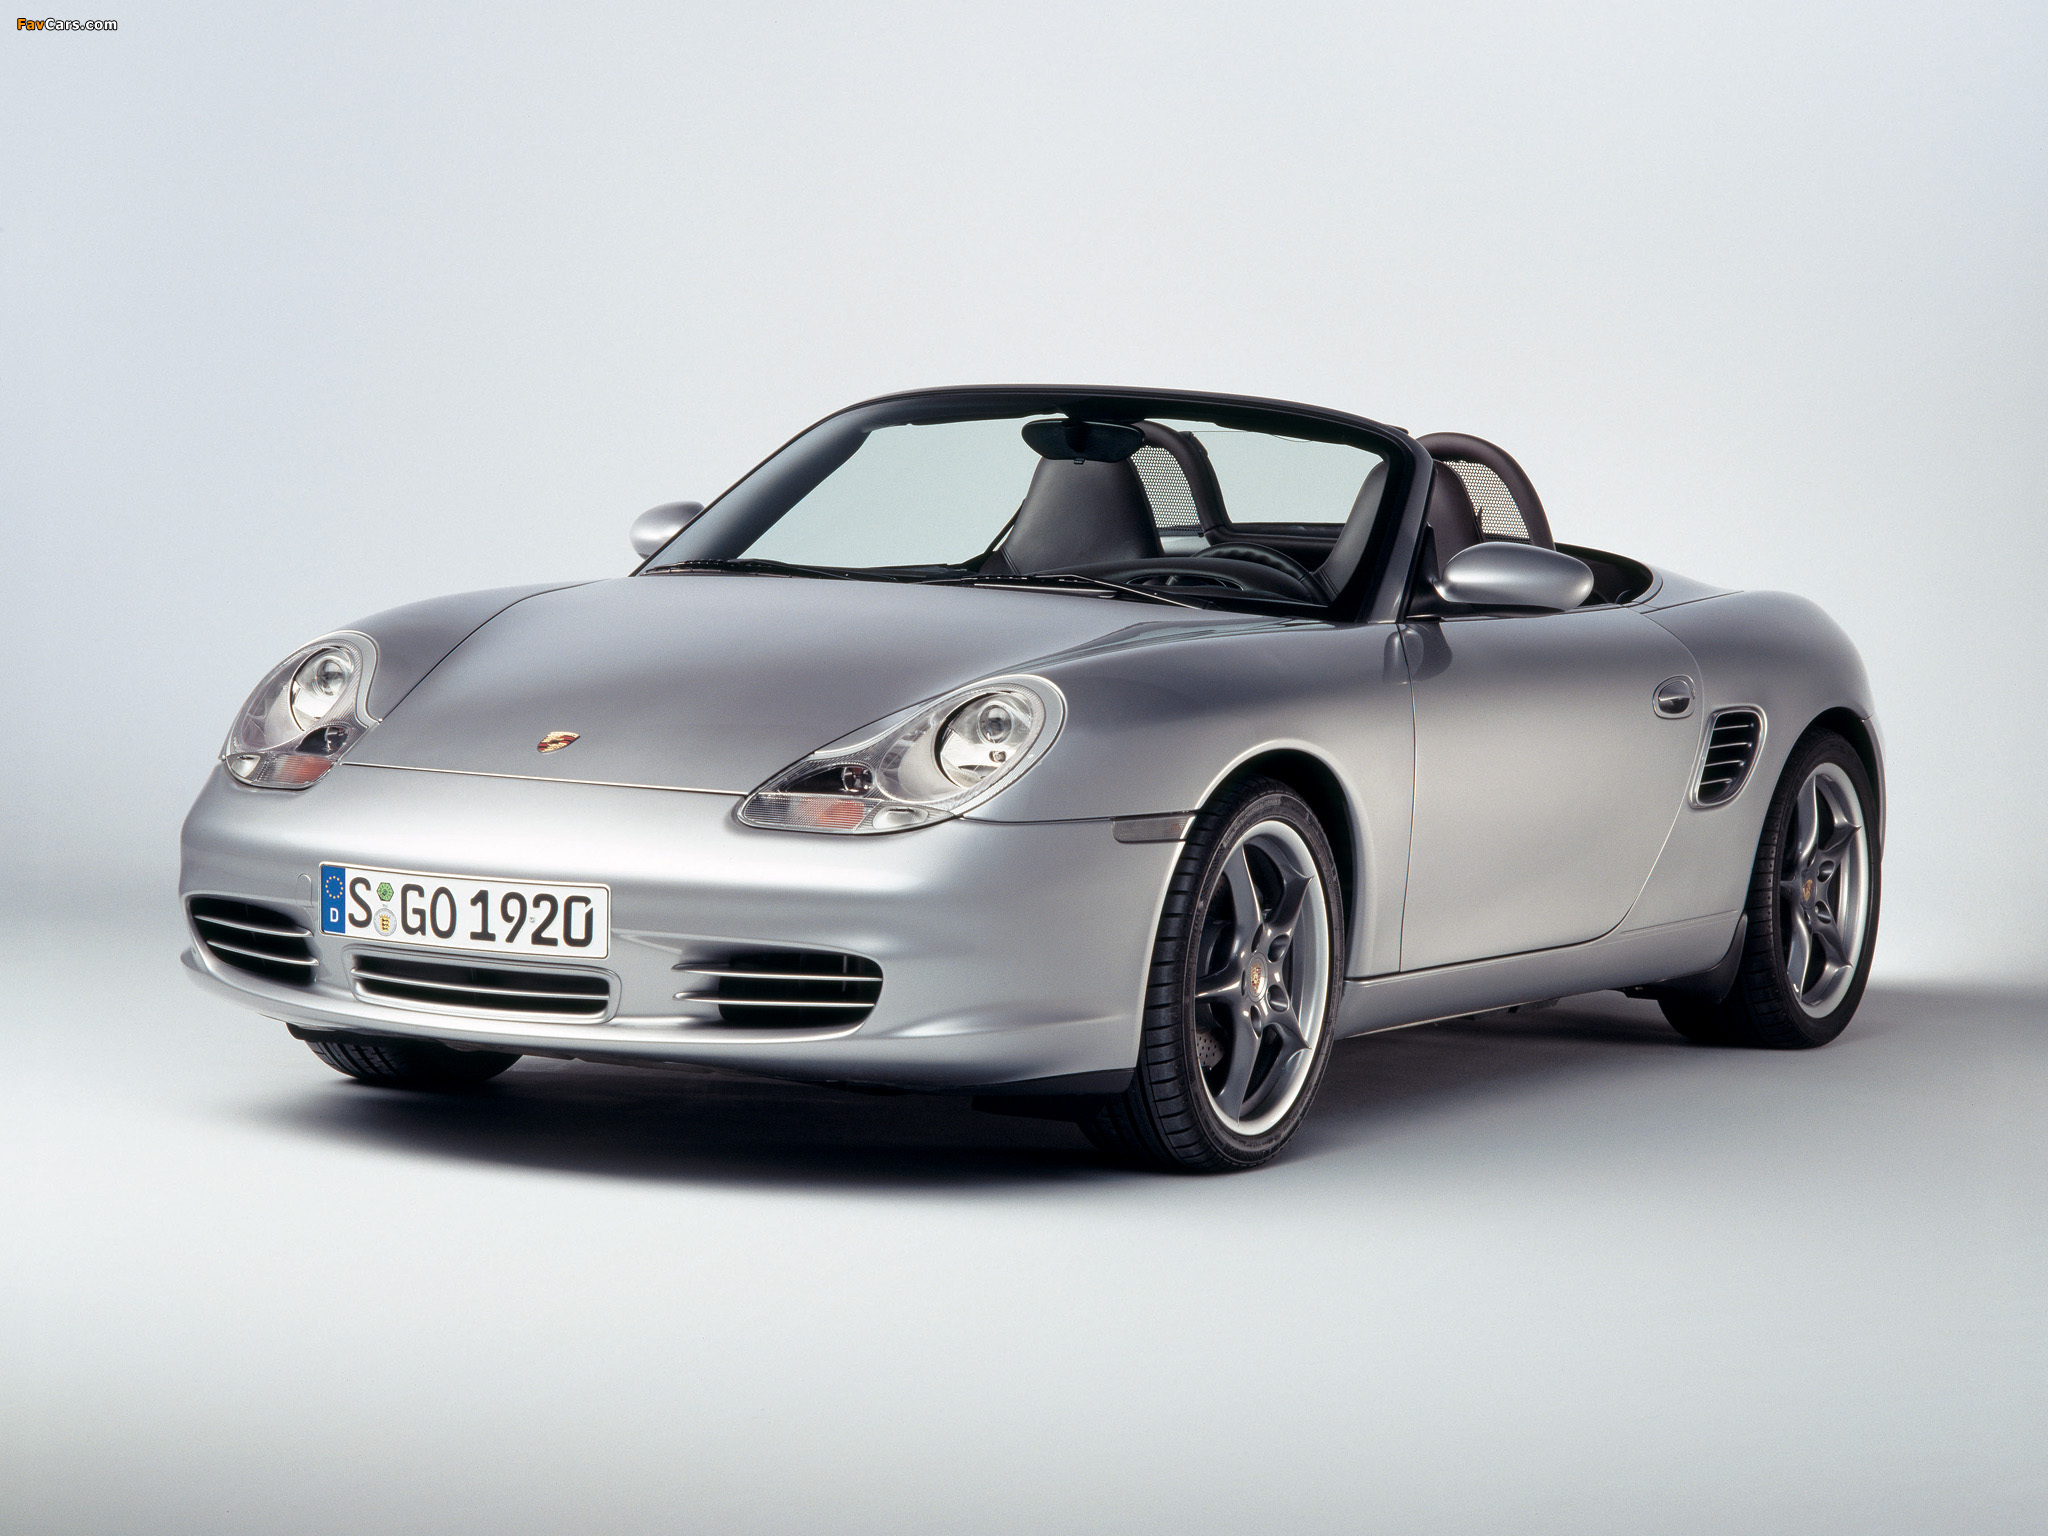 Porsche Boxster S 50 years 550 Spyder (986) 2004 pictures (2048 x 1536)